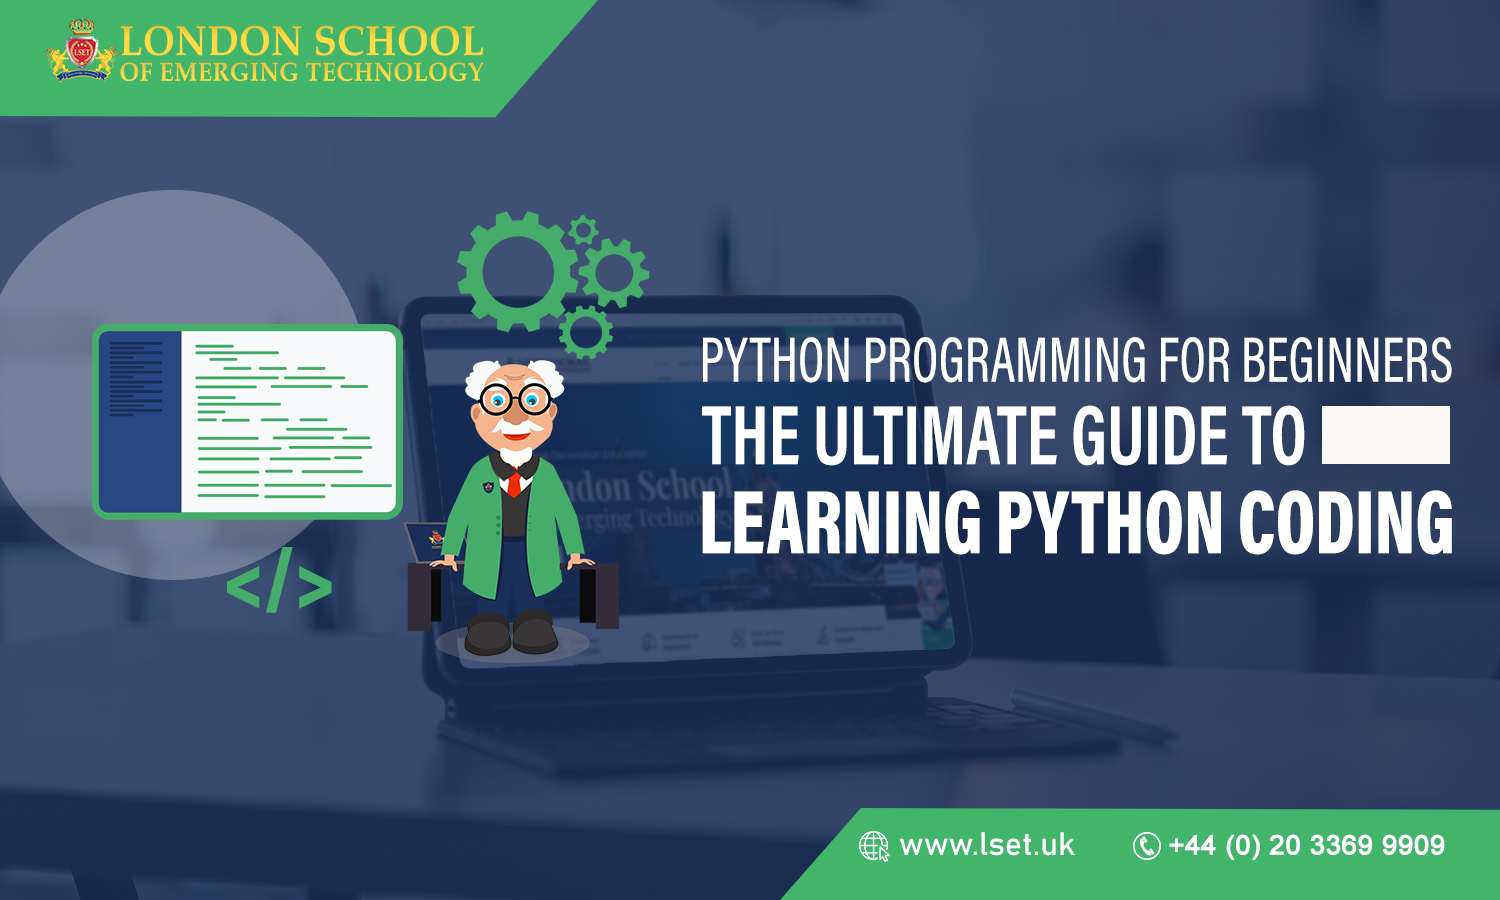 Python Programming for Beginners The Ultimate Guide to Learning Python Coding